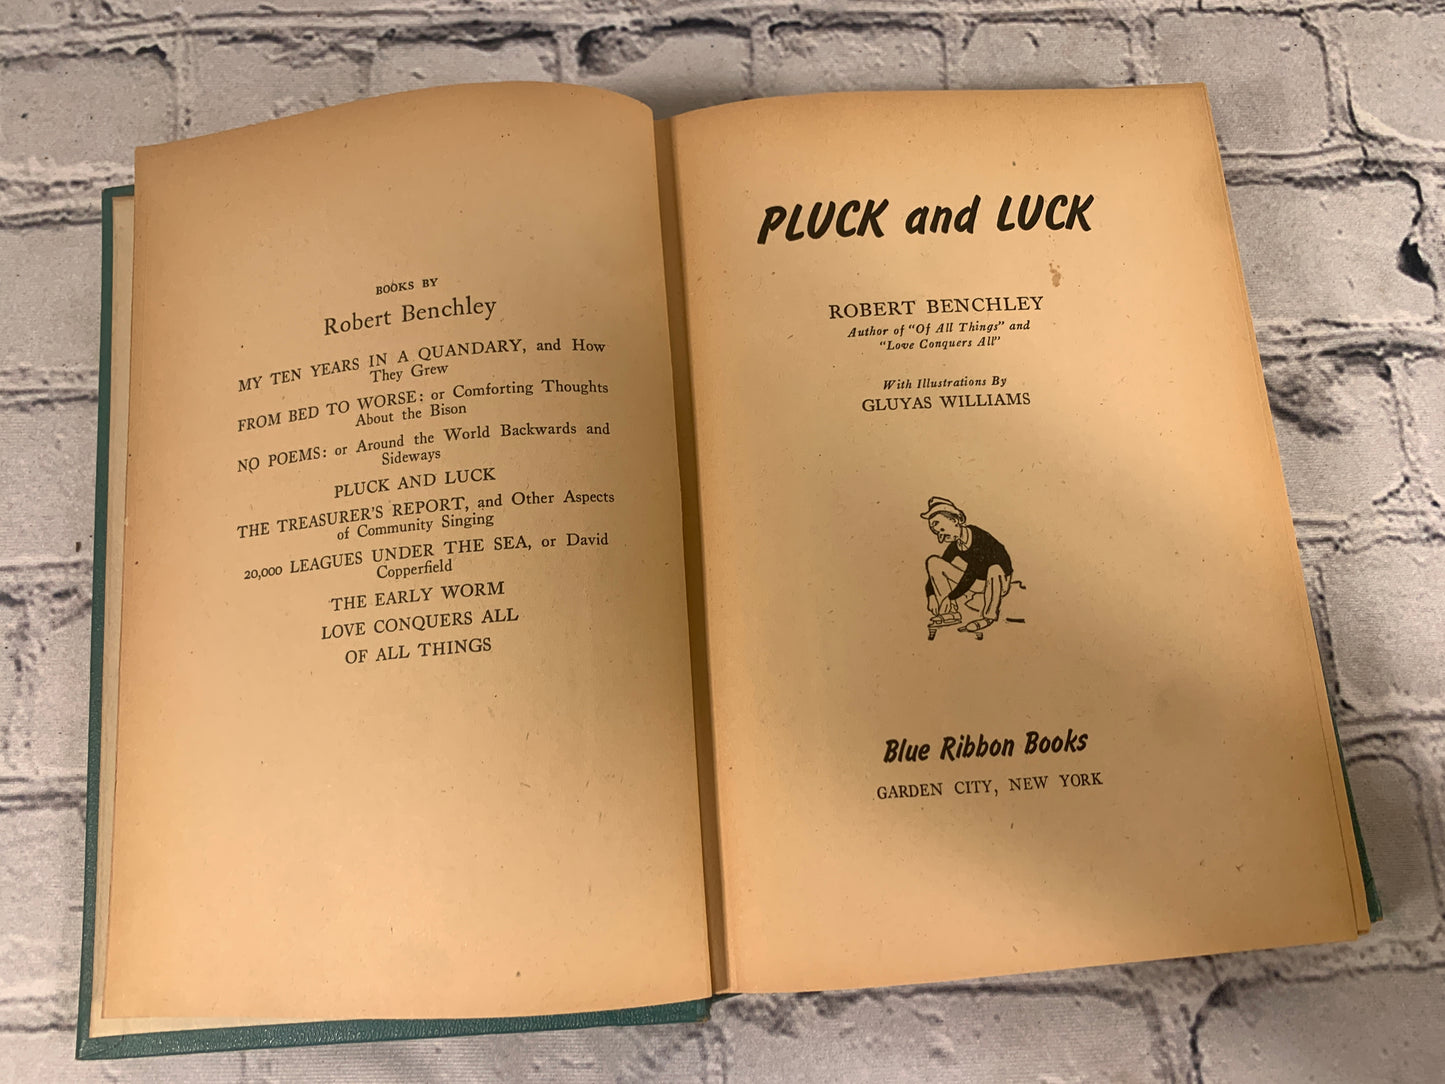 Pluck & Luck by Robert Benchley [1947]